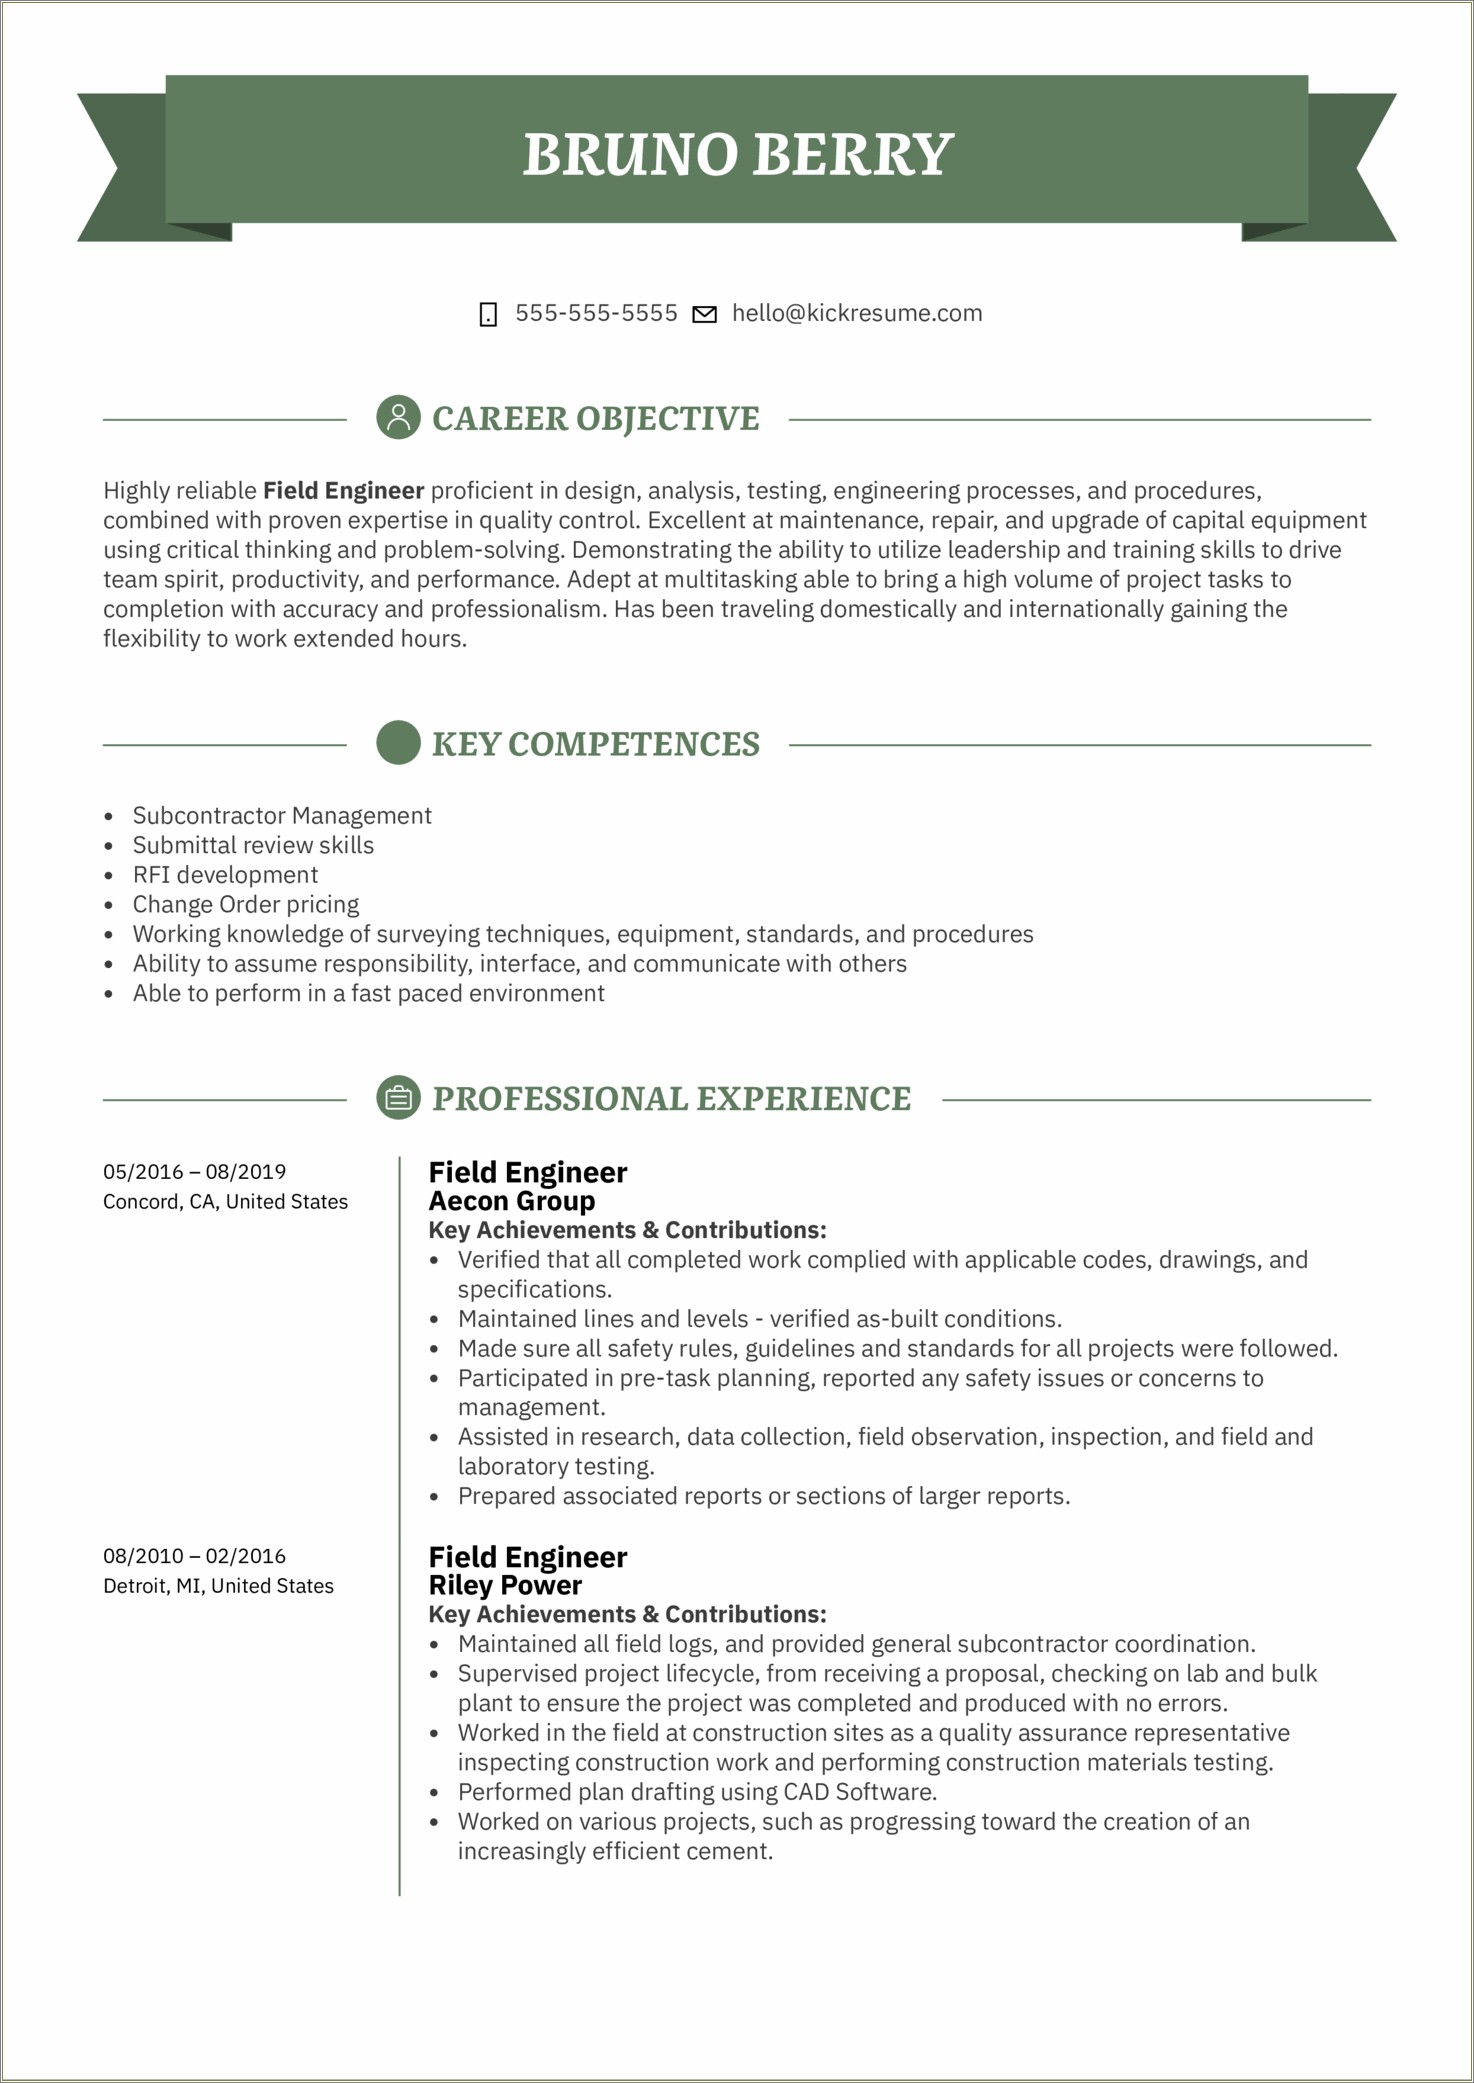 Resumes And Summary Statements With Job Experience Usa